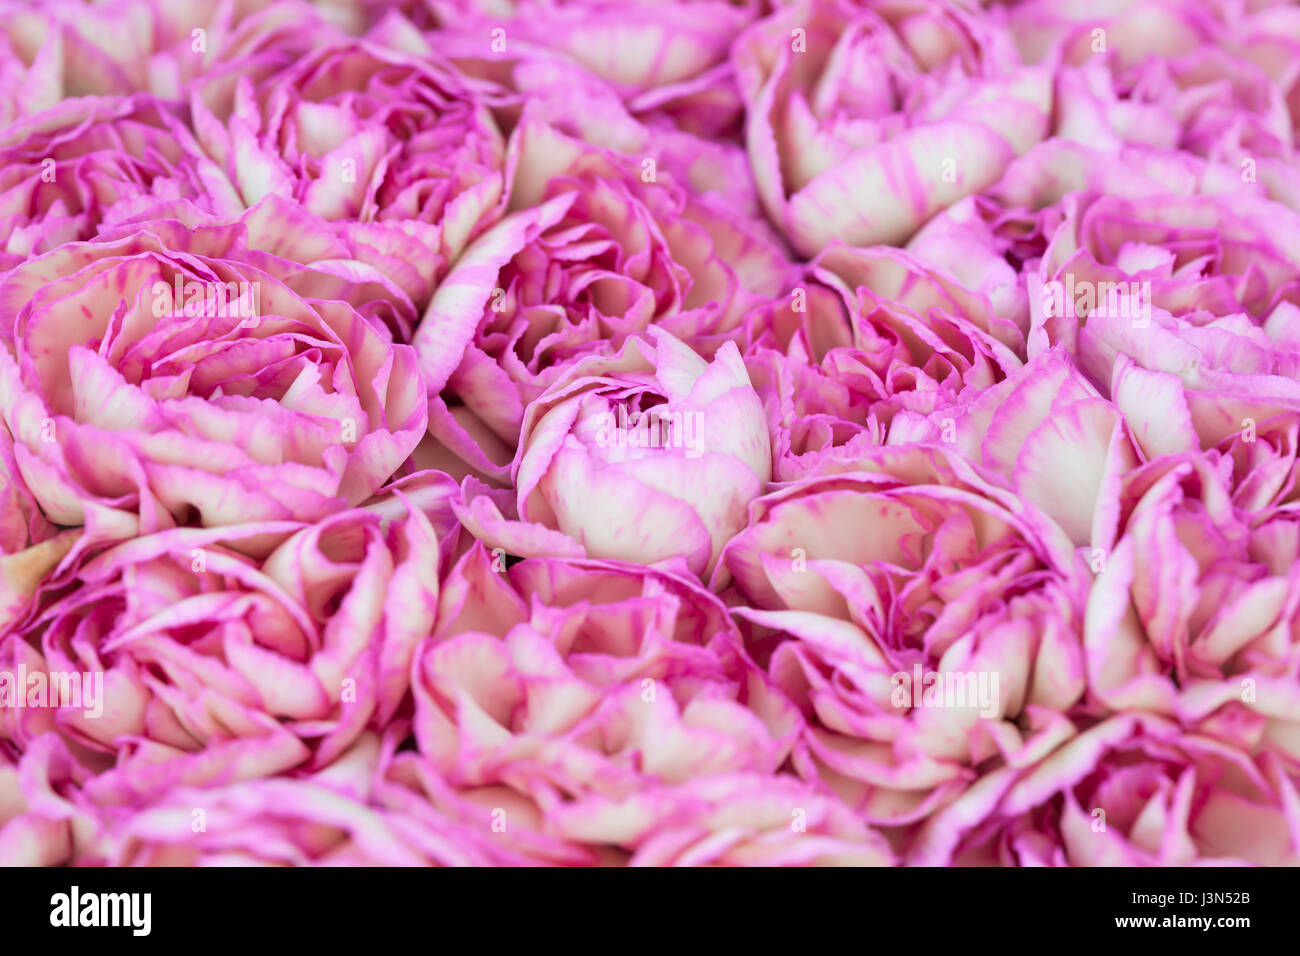 Full frame variegated pink and white carnations. Stock Photo